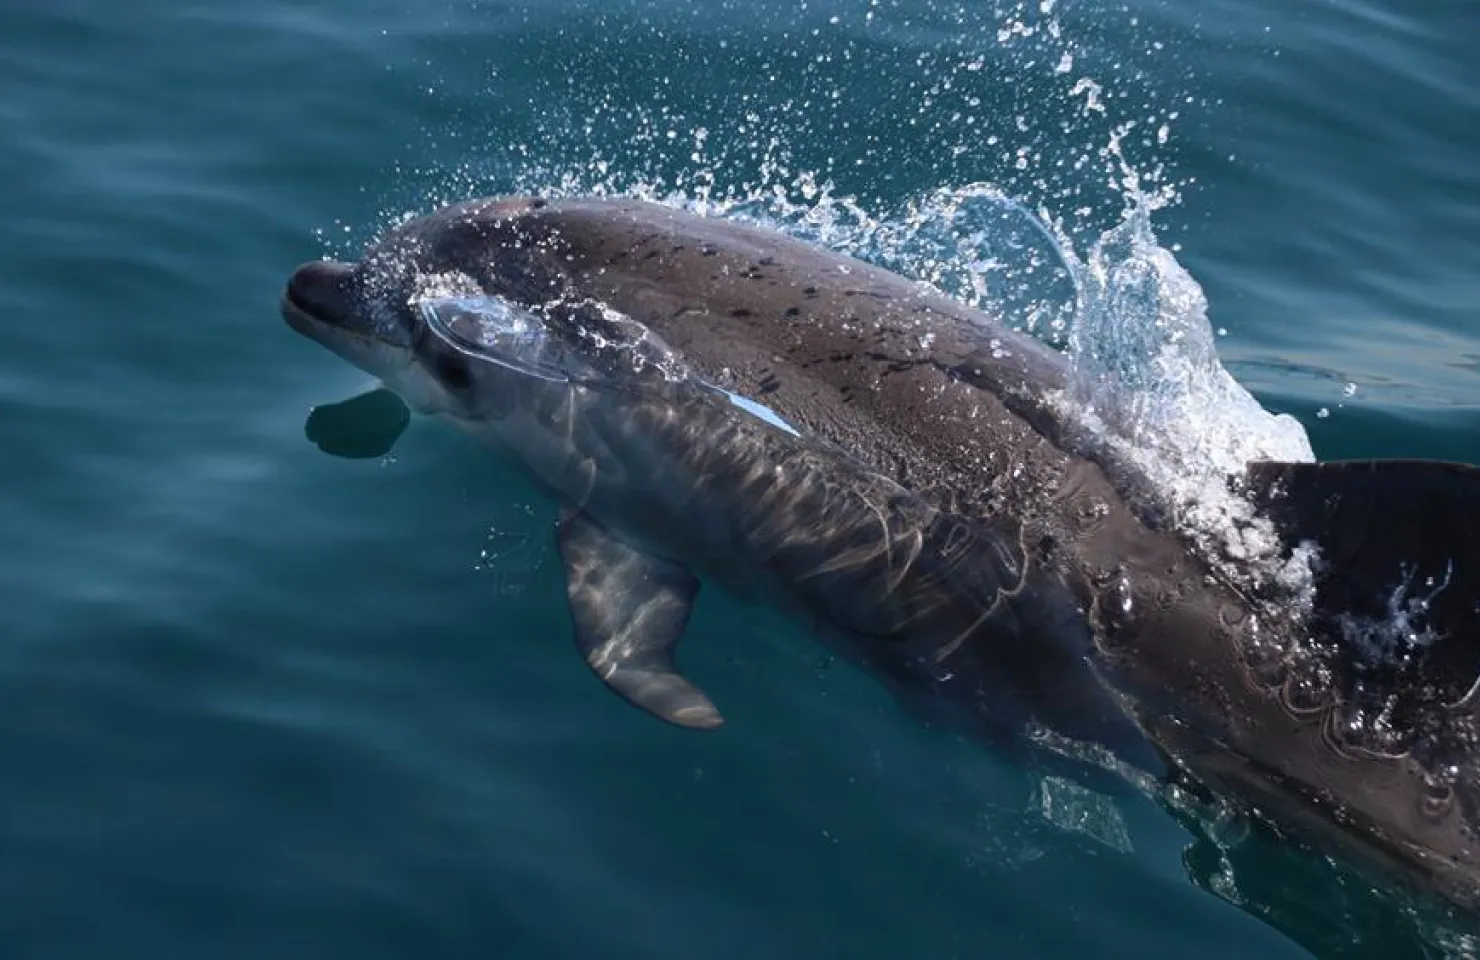 Boat trip to see dolphins in Algarve